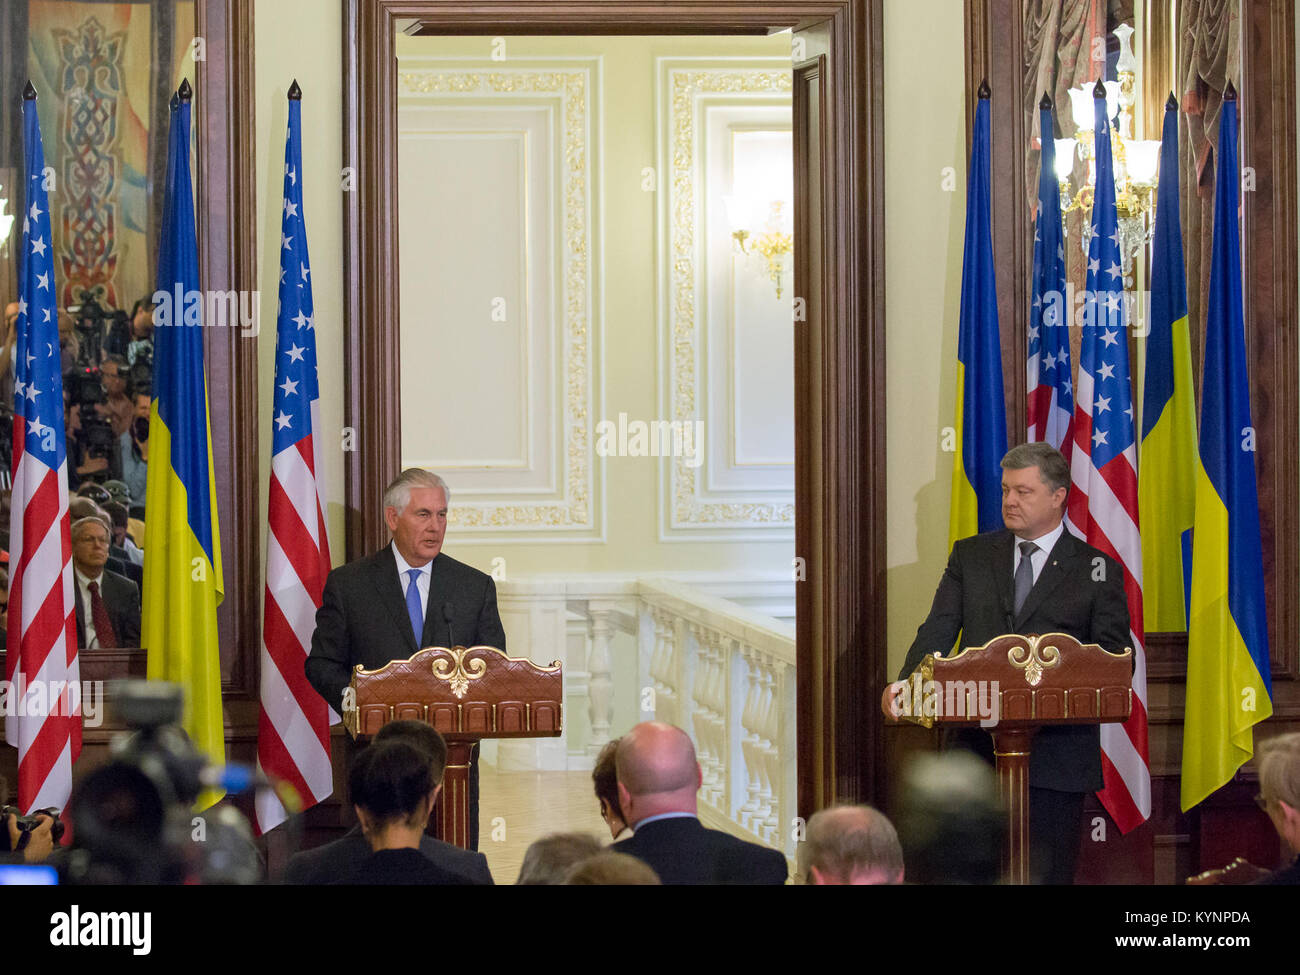 U.S. Secretary of State Rex Tillerson participates in a joint press availability with President Petro Poroshenko in Kyiv, Ukraine, on July 9, 2017. Secretary Tillerson Participates in a Joint Press Availability in Kyiv 35689045581 o Stock Photo